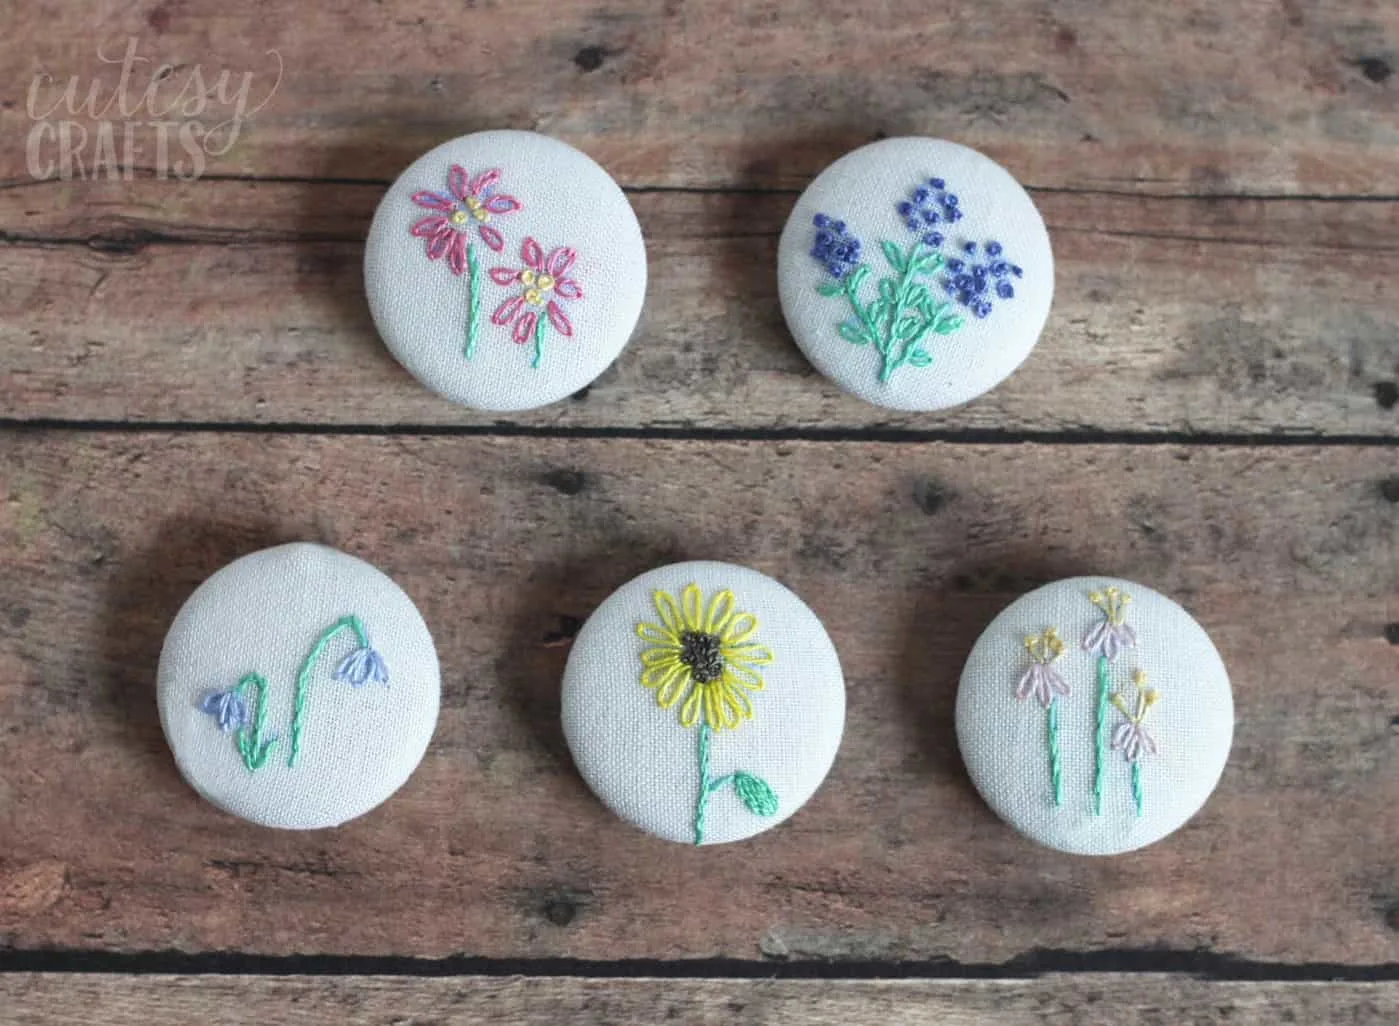 Blue and White Floral Magnets Set of 6 Magnets Blue and White Magnets  Cabochon Magnets Gift for Mom Fridge Magnet Gift for Women 